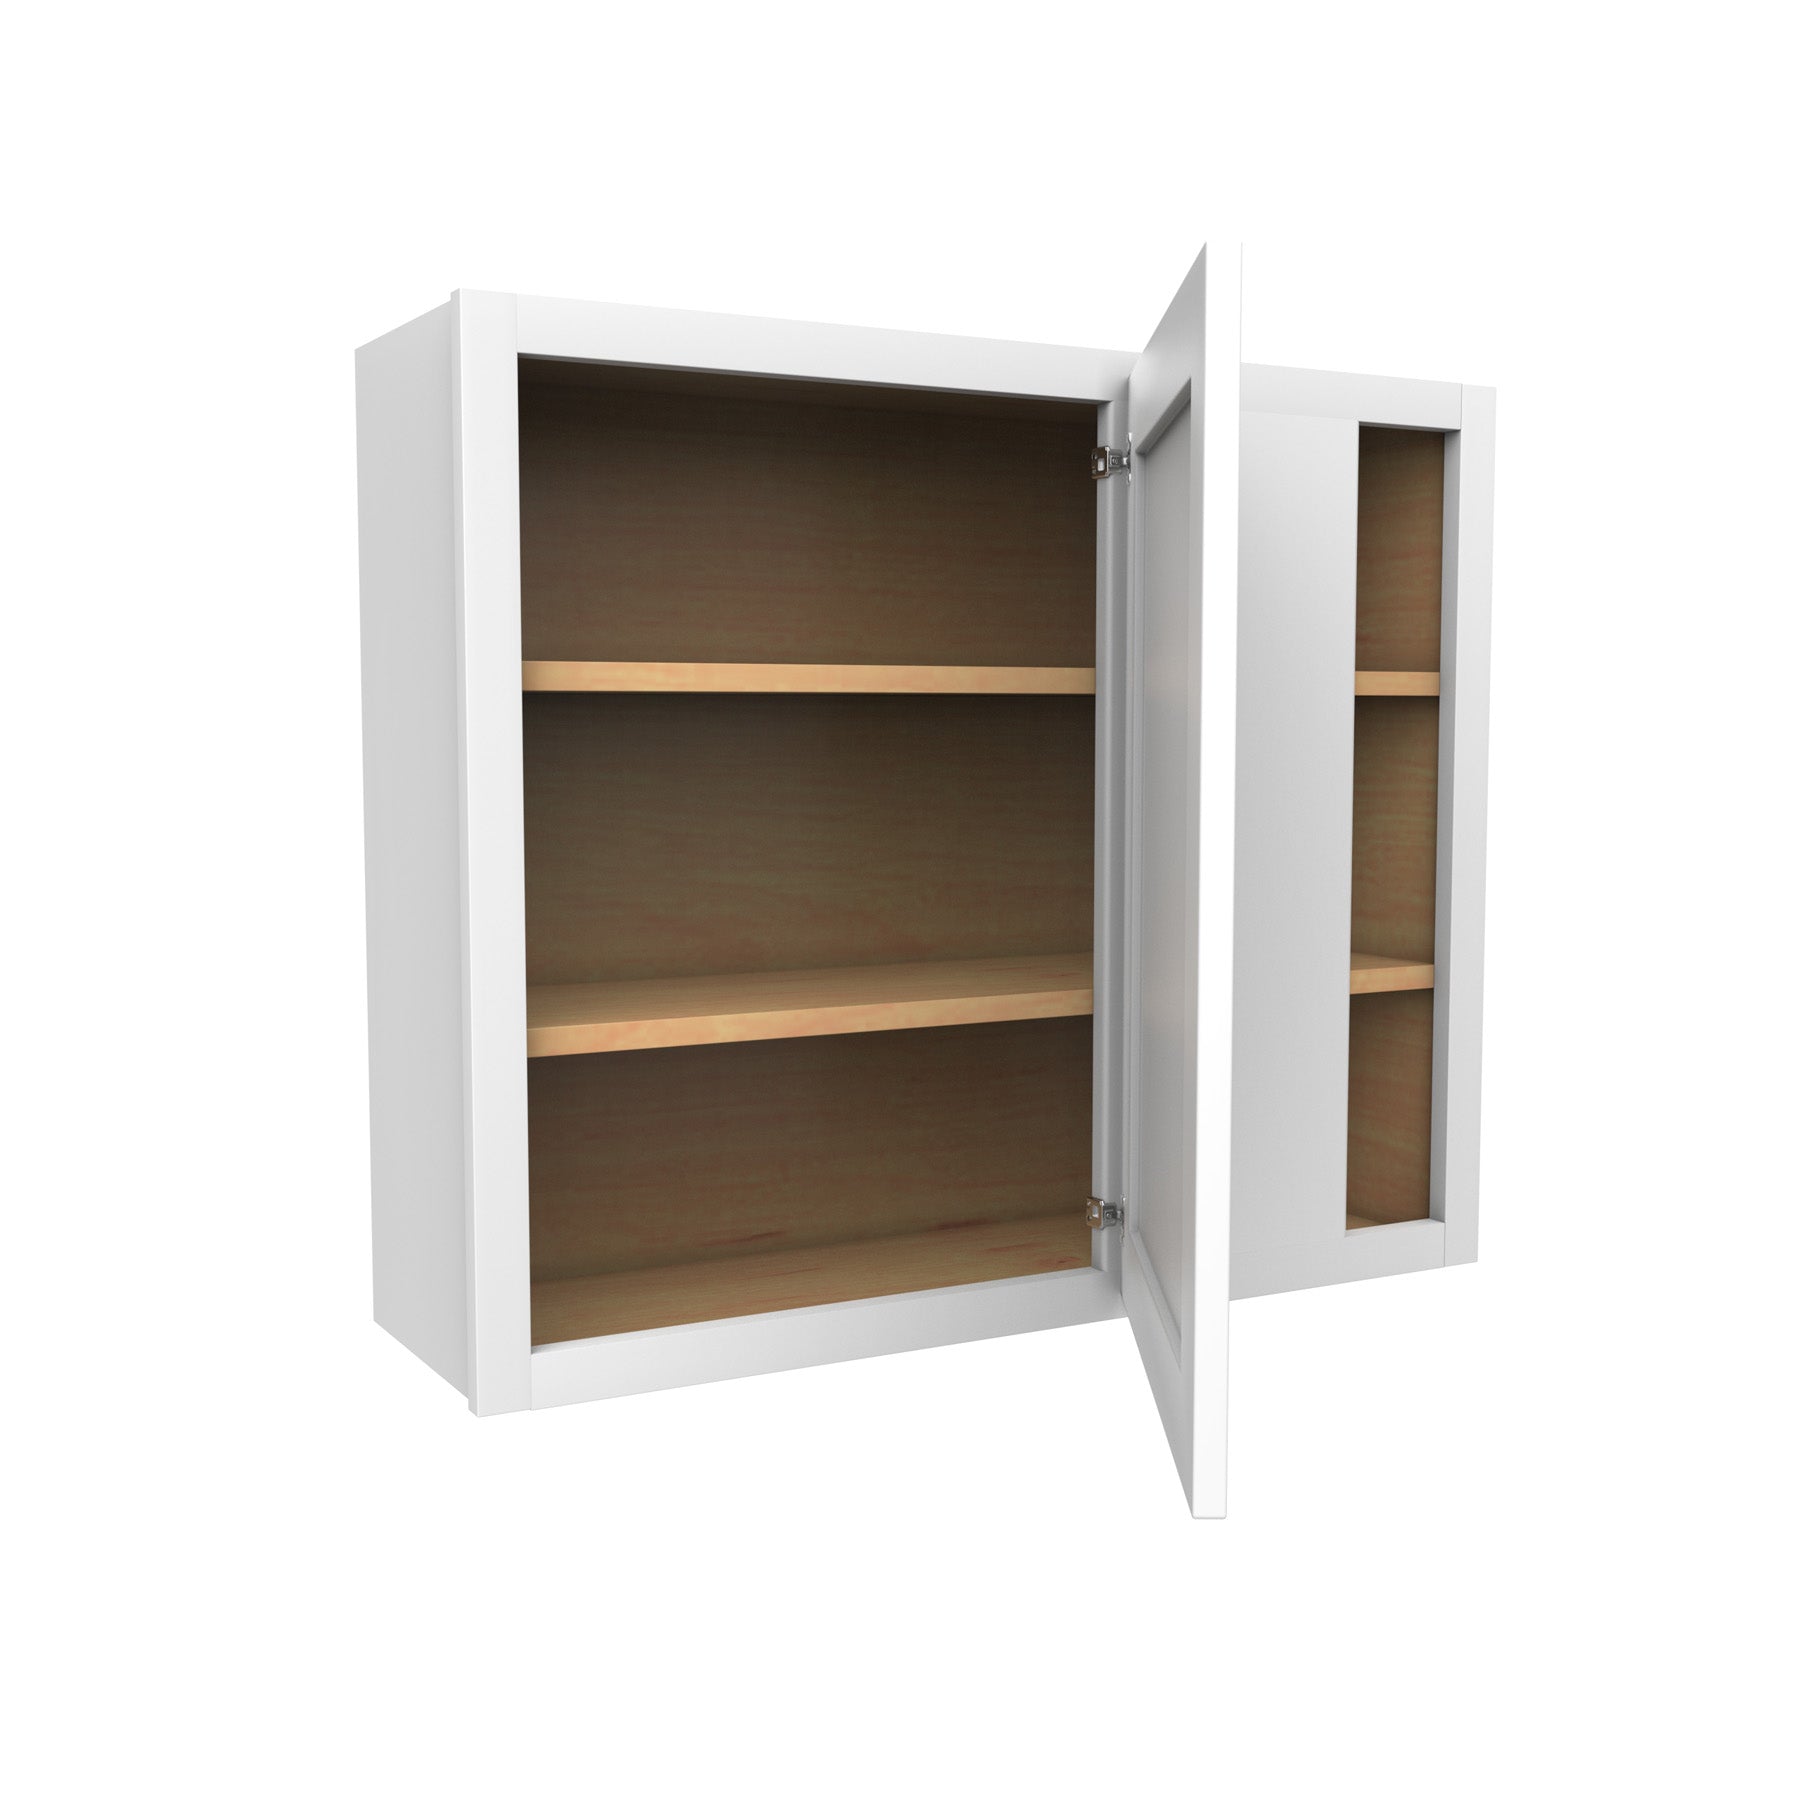 30 Inch High Blind Wall Cabinet - Luxor White Shaker - Ready To Assemble, 36"W x 30"H x 12"D